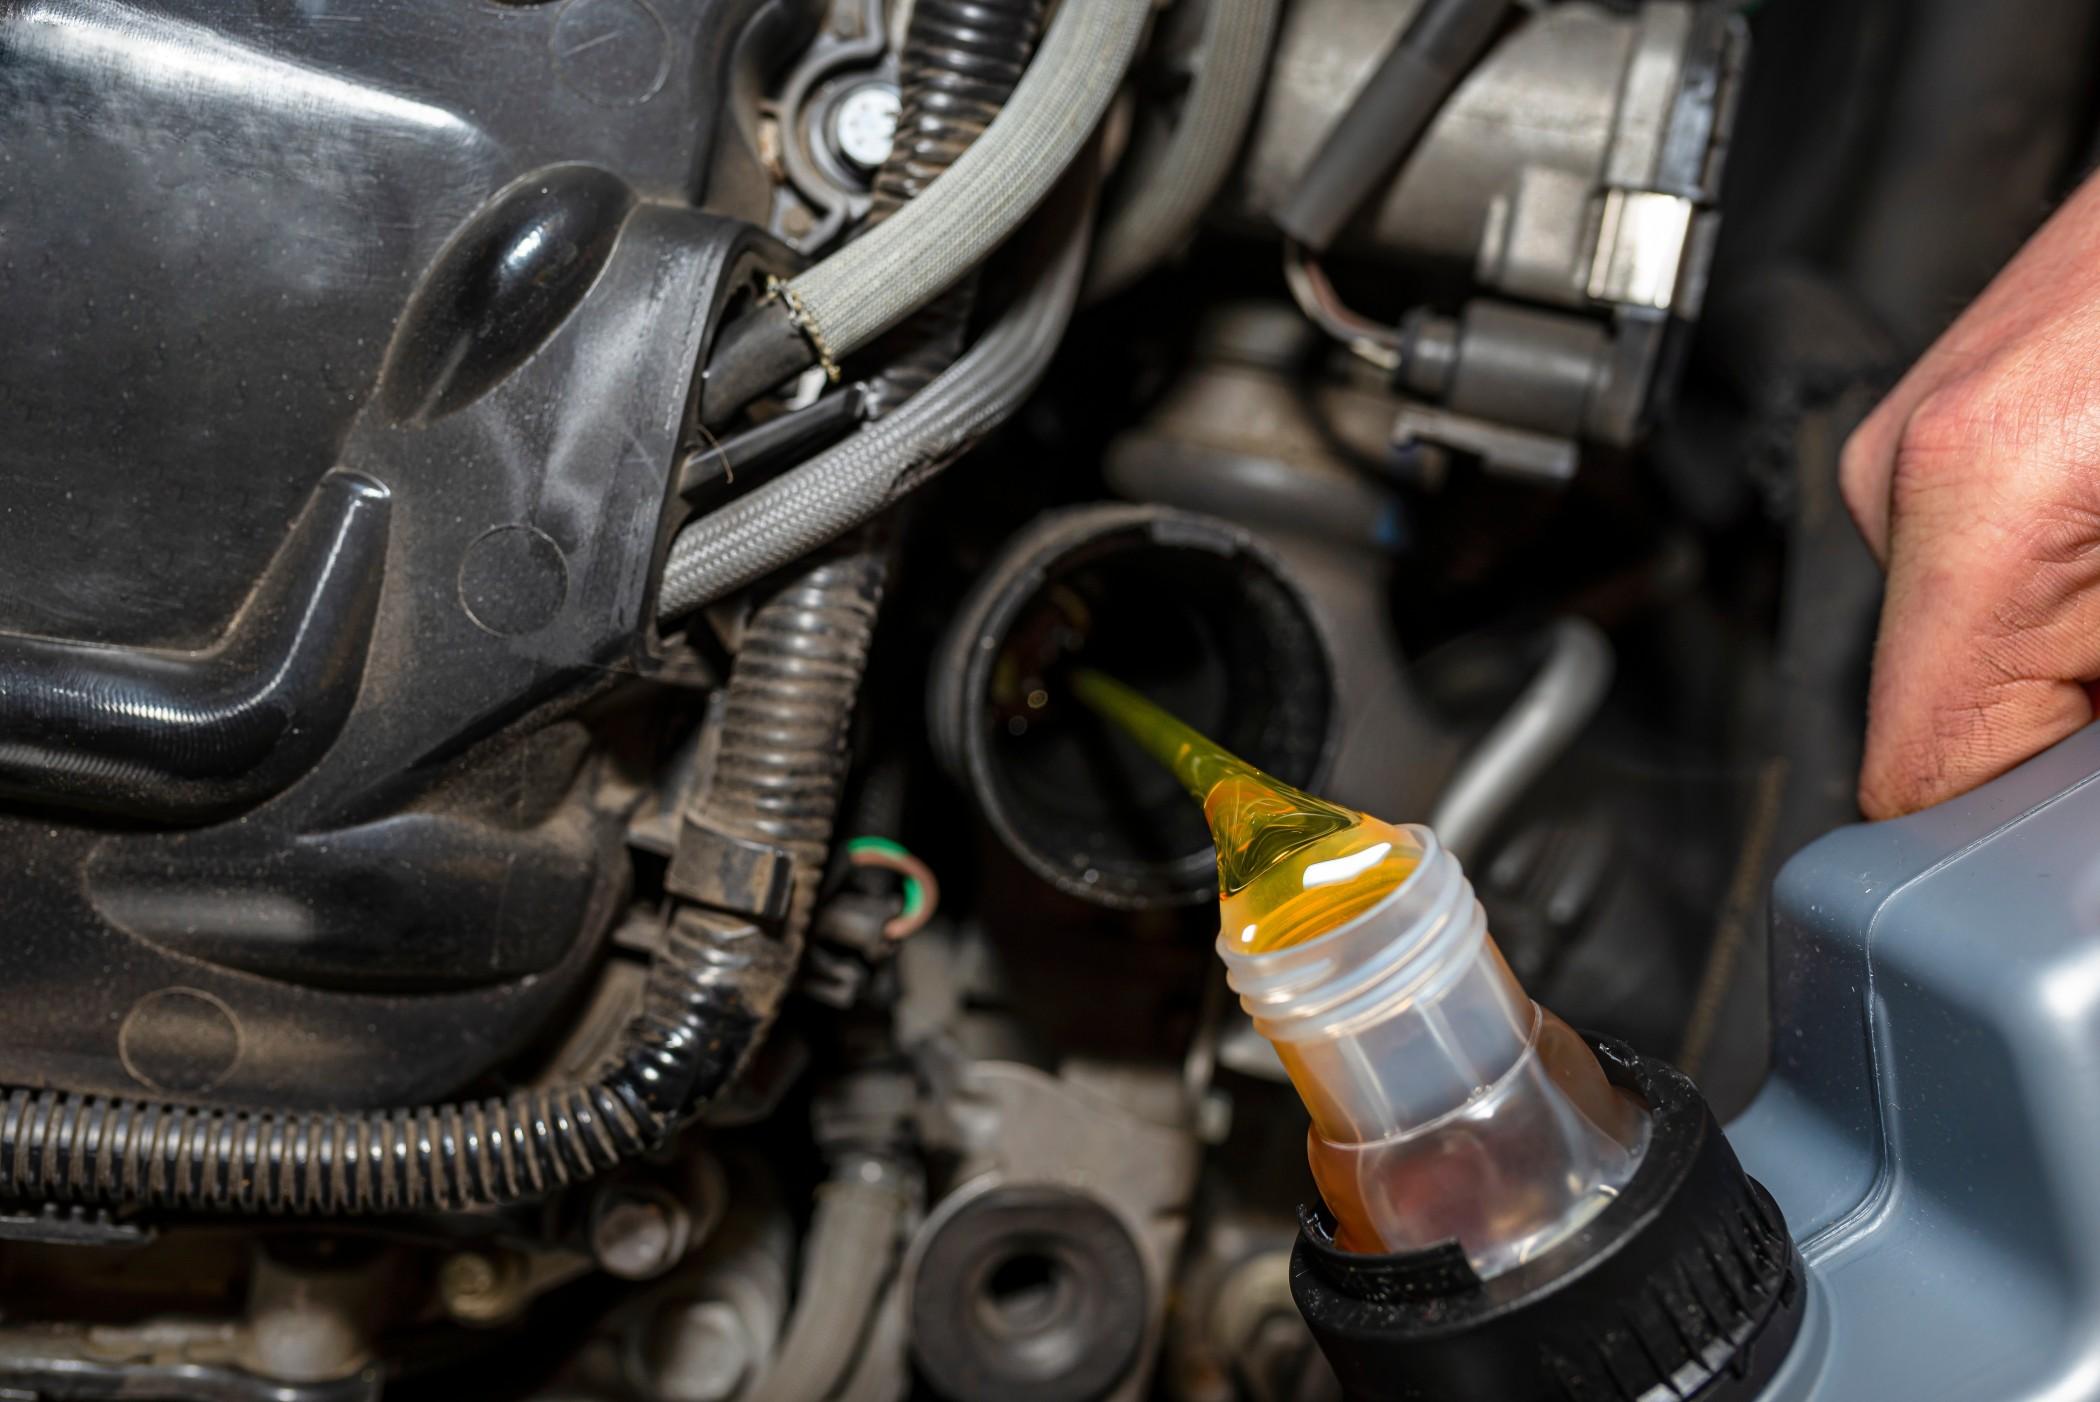 Fresh oil is poured into an engine during an oil change.